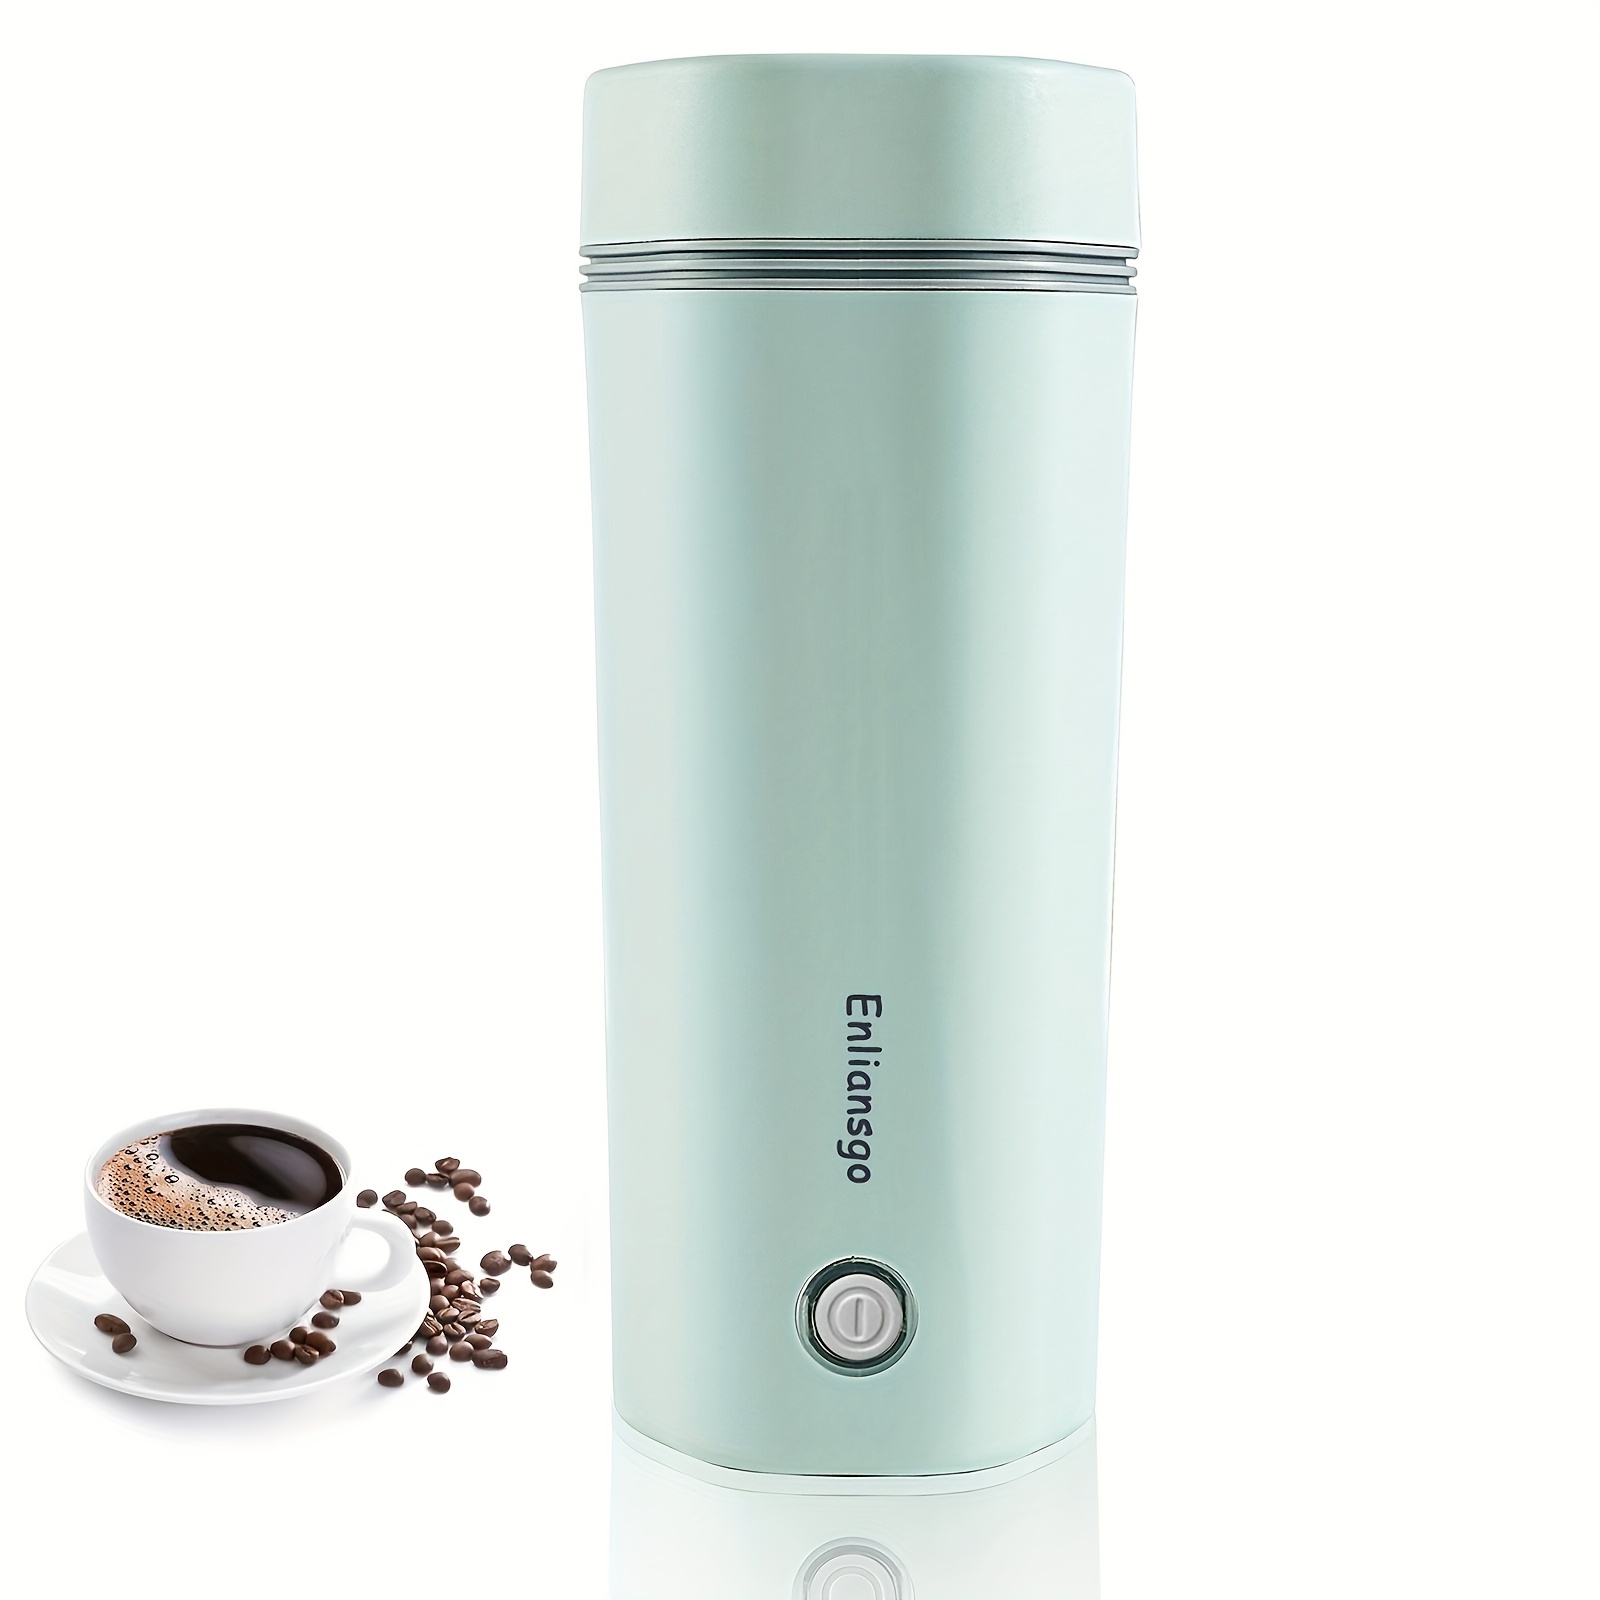 Portable Travel Electric Kettle Mini Thermos Fast Boil Teapot Heating Cup Stainless Steel Metal Bottle